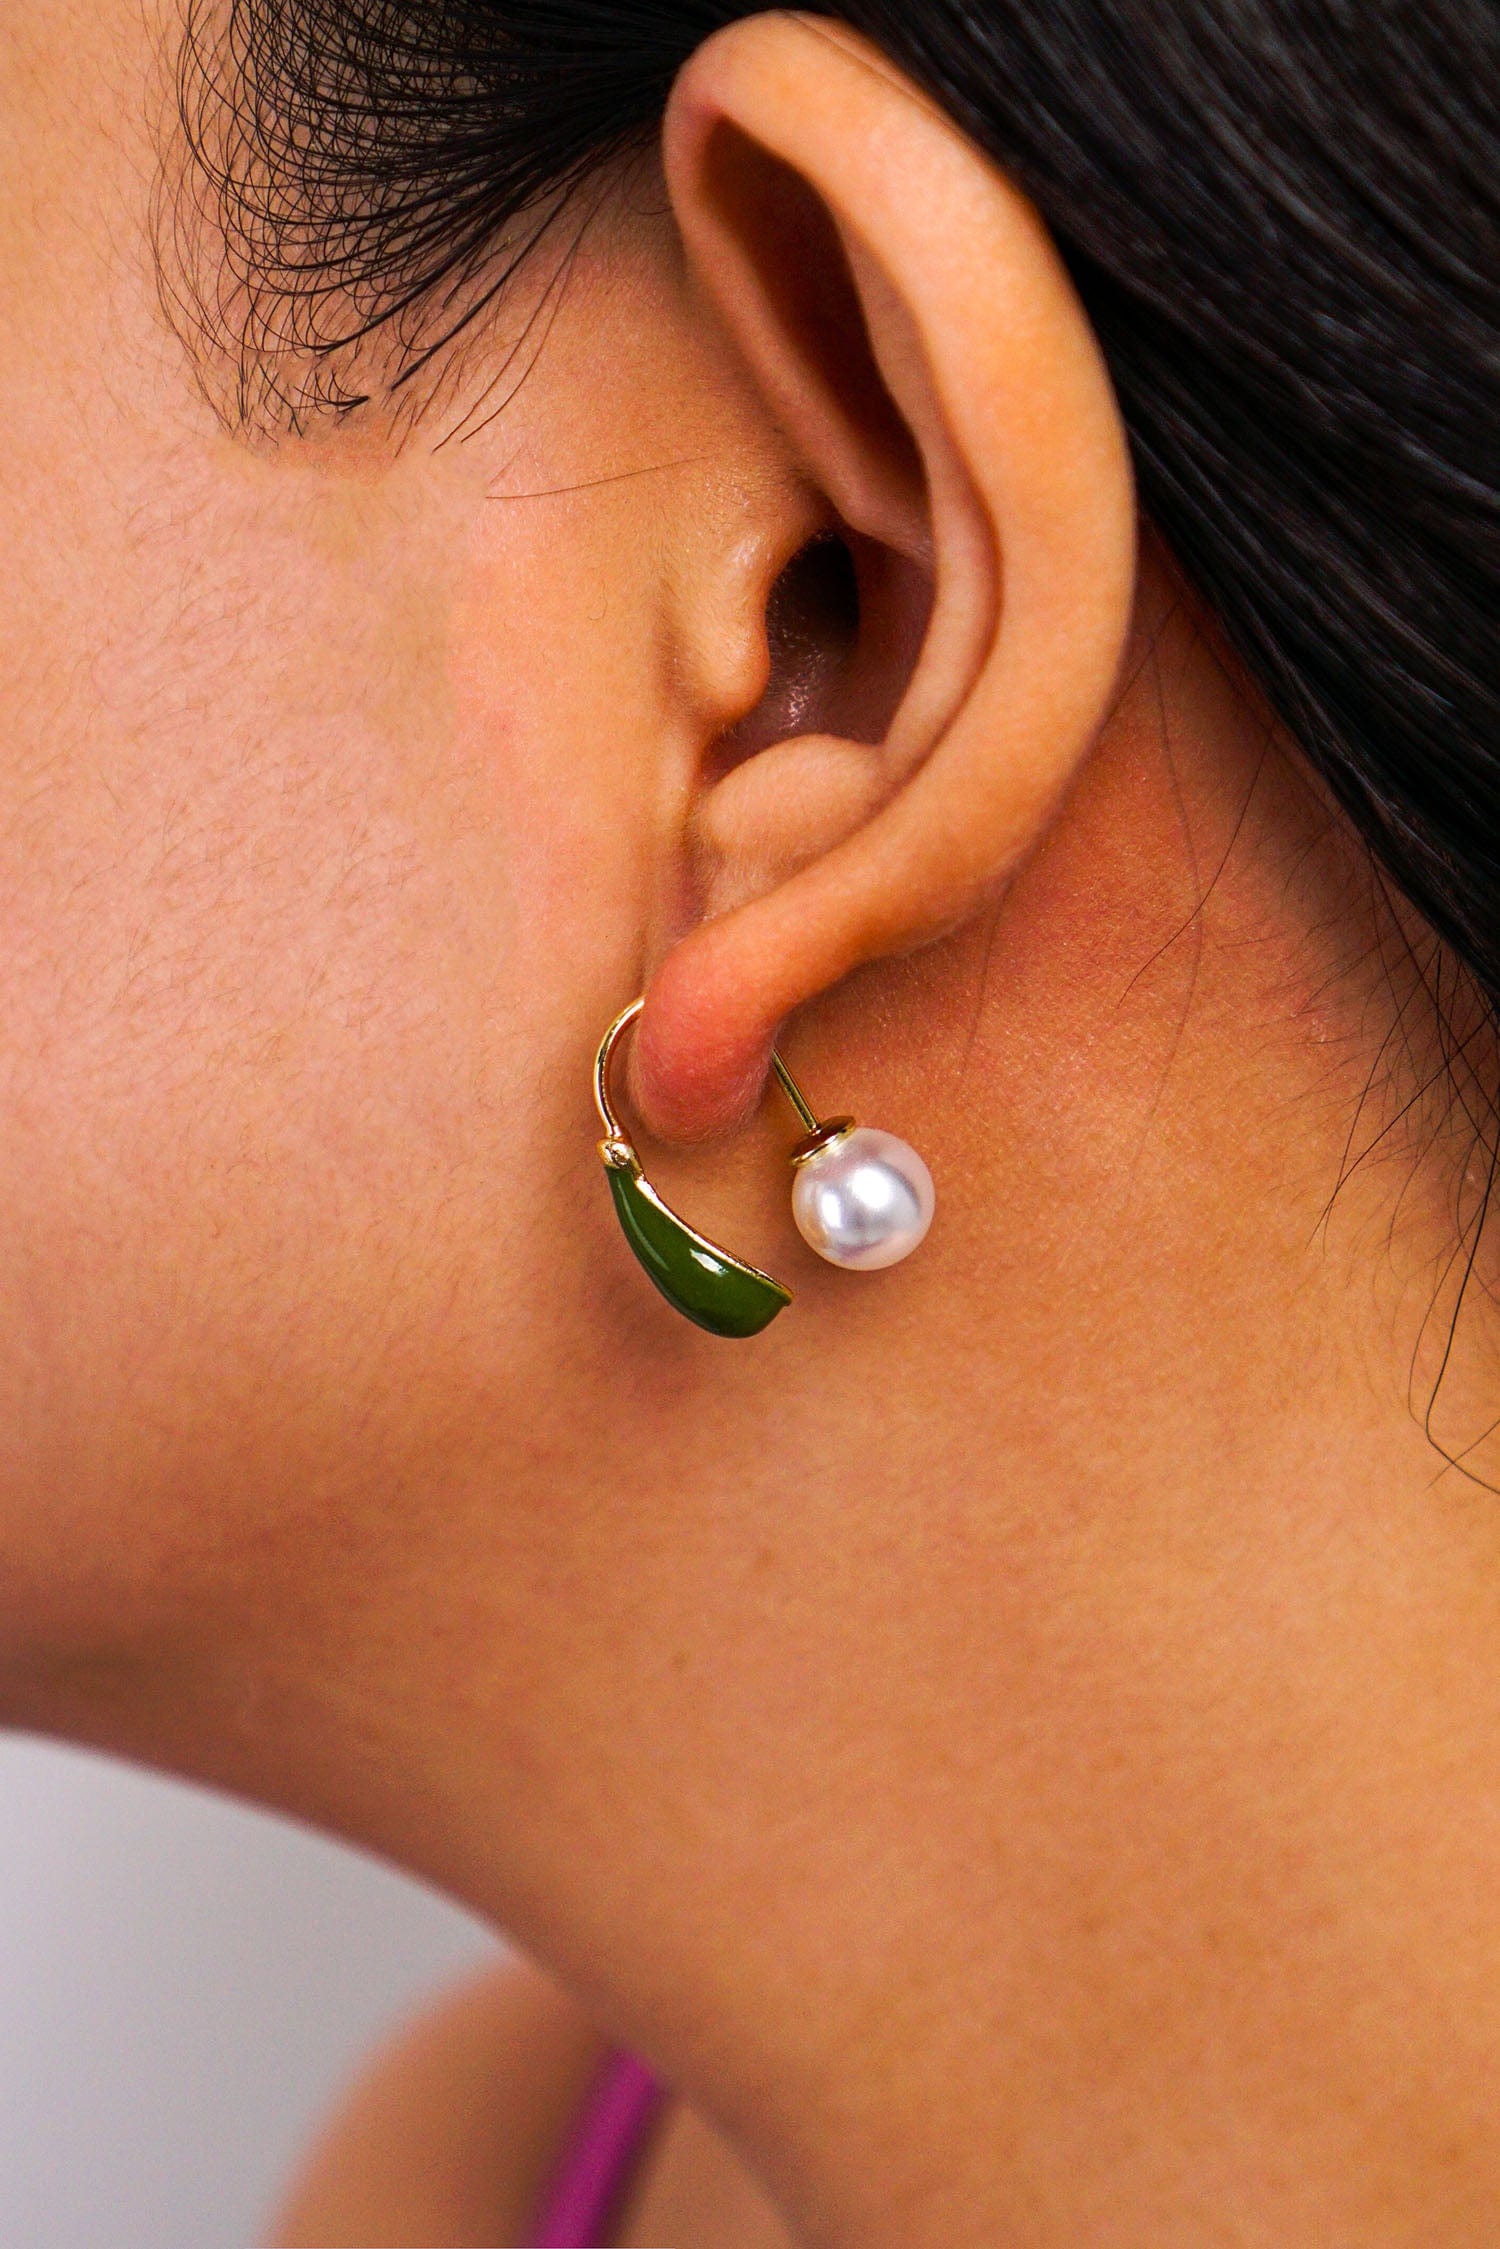 Buy BEAUTY PLUS COLLECTION DARK GREEN EARRINGS at Amazon.in